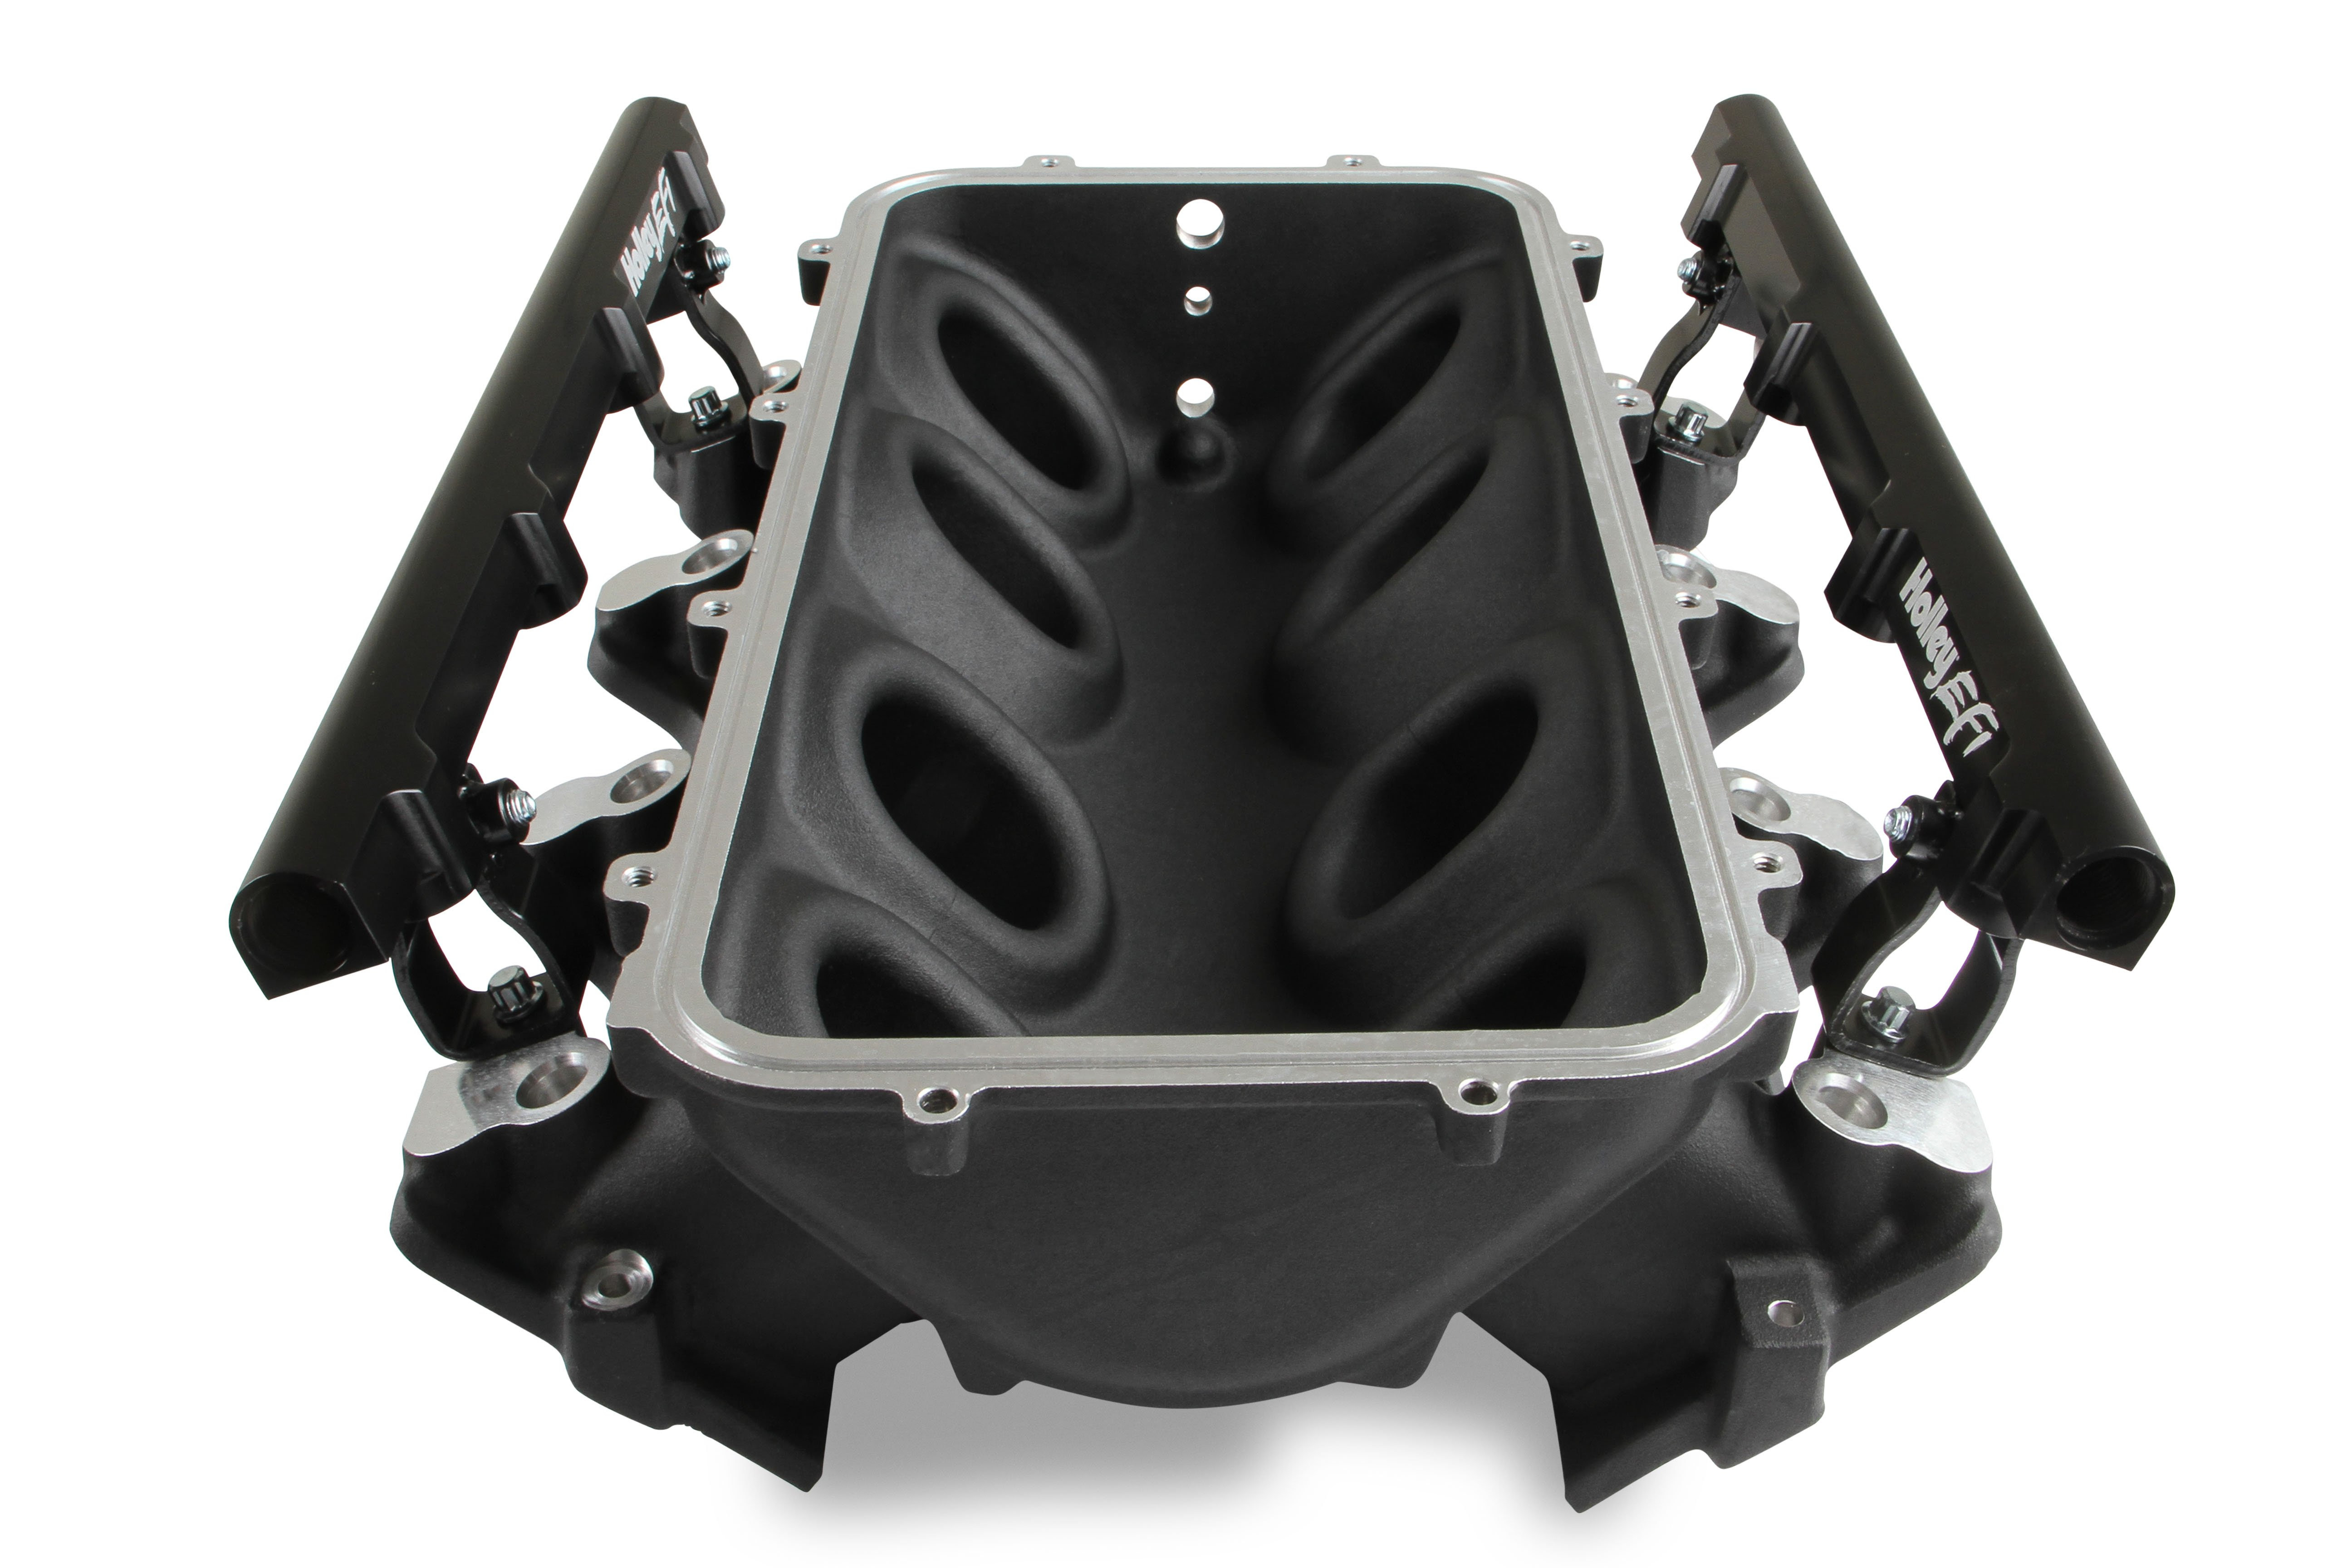 The Holley LS1/2/6 Lo-Ram intake manifold kits are designed for GM LS Gen I...